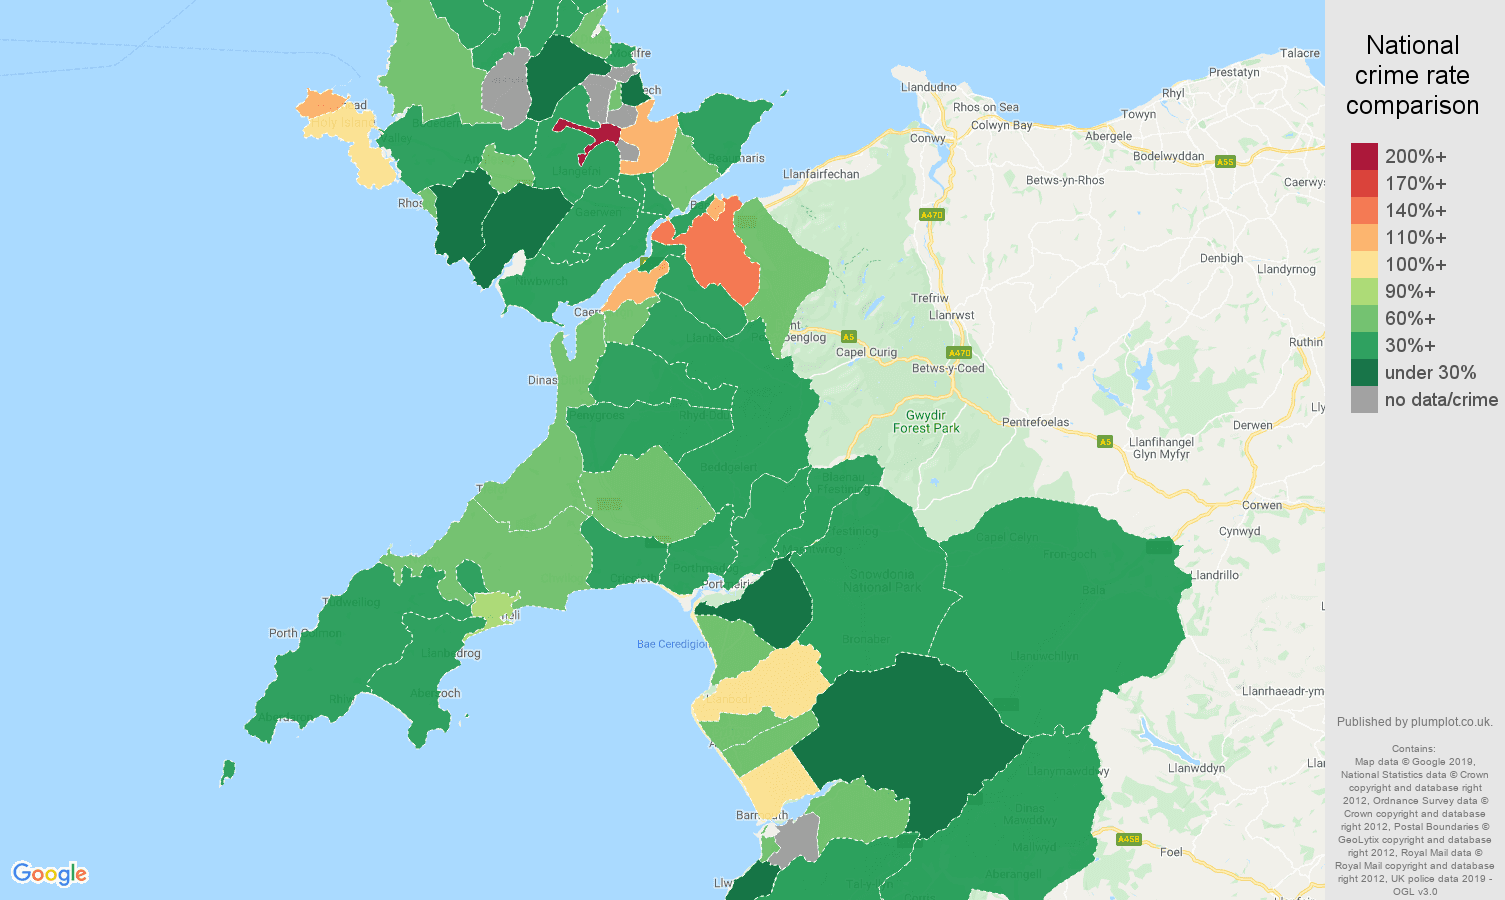 Gwynedd other theft crime rate comparison map